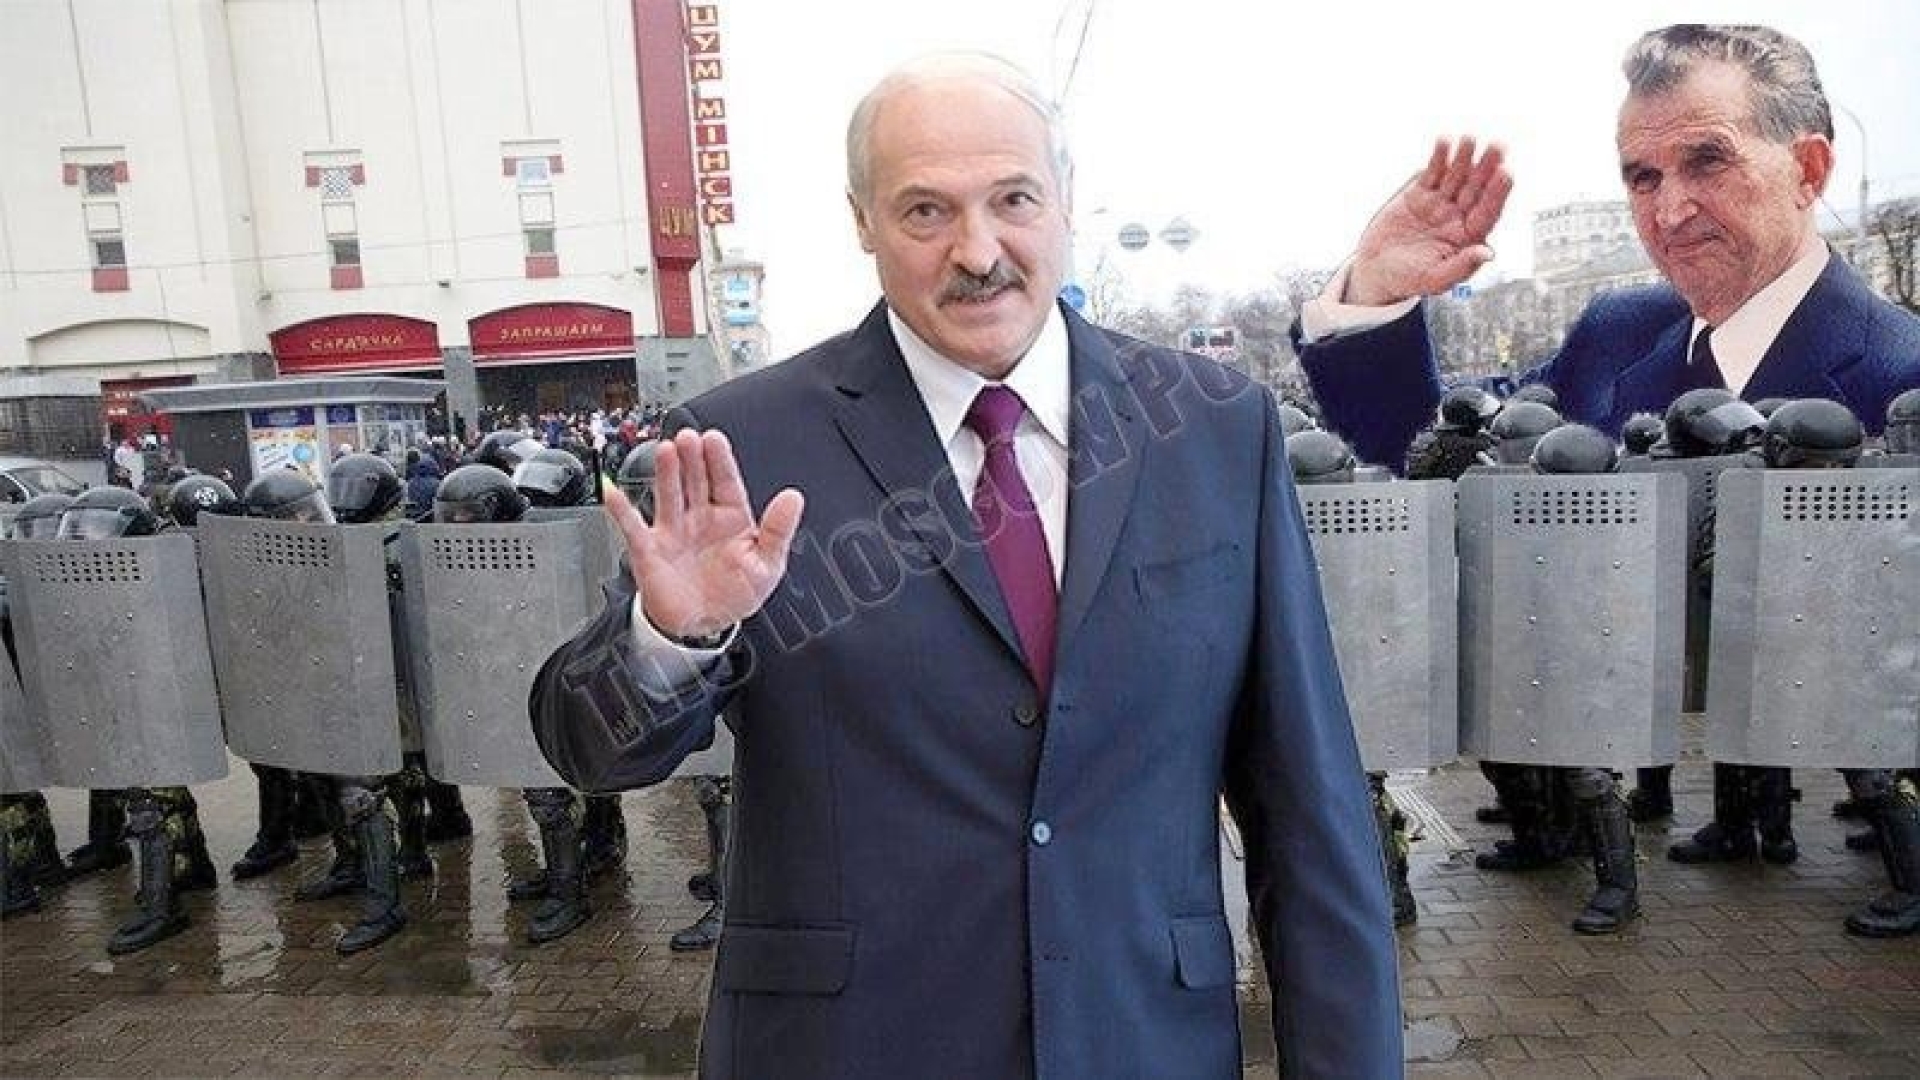 Lukashenko following the way of Ceausescu?